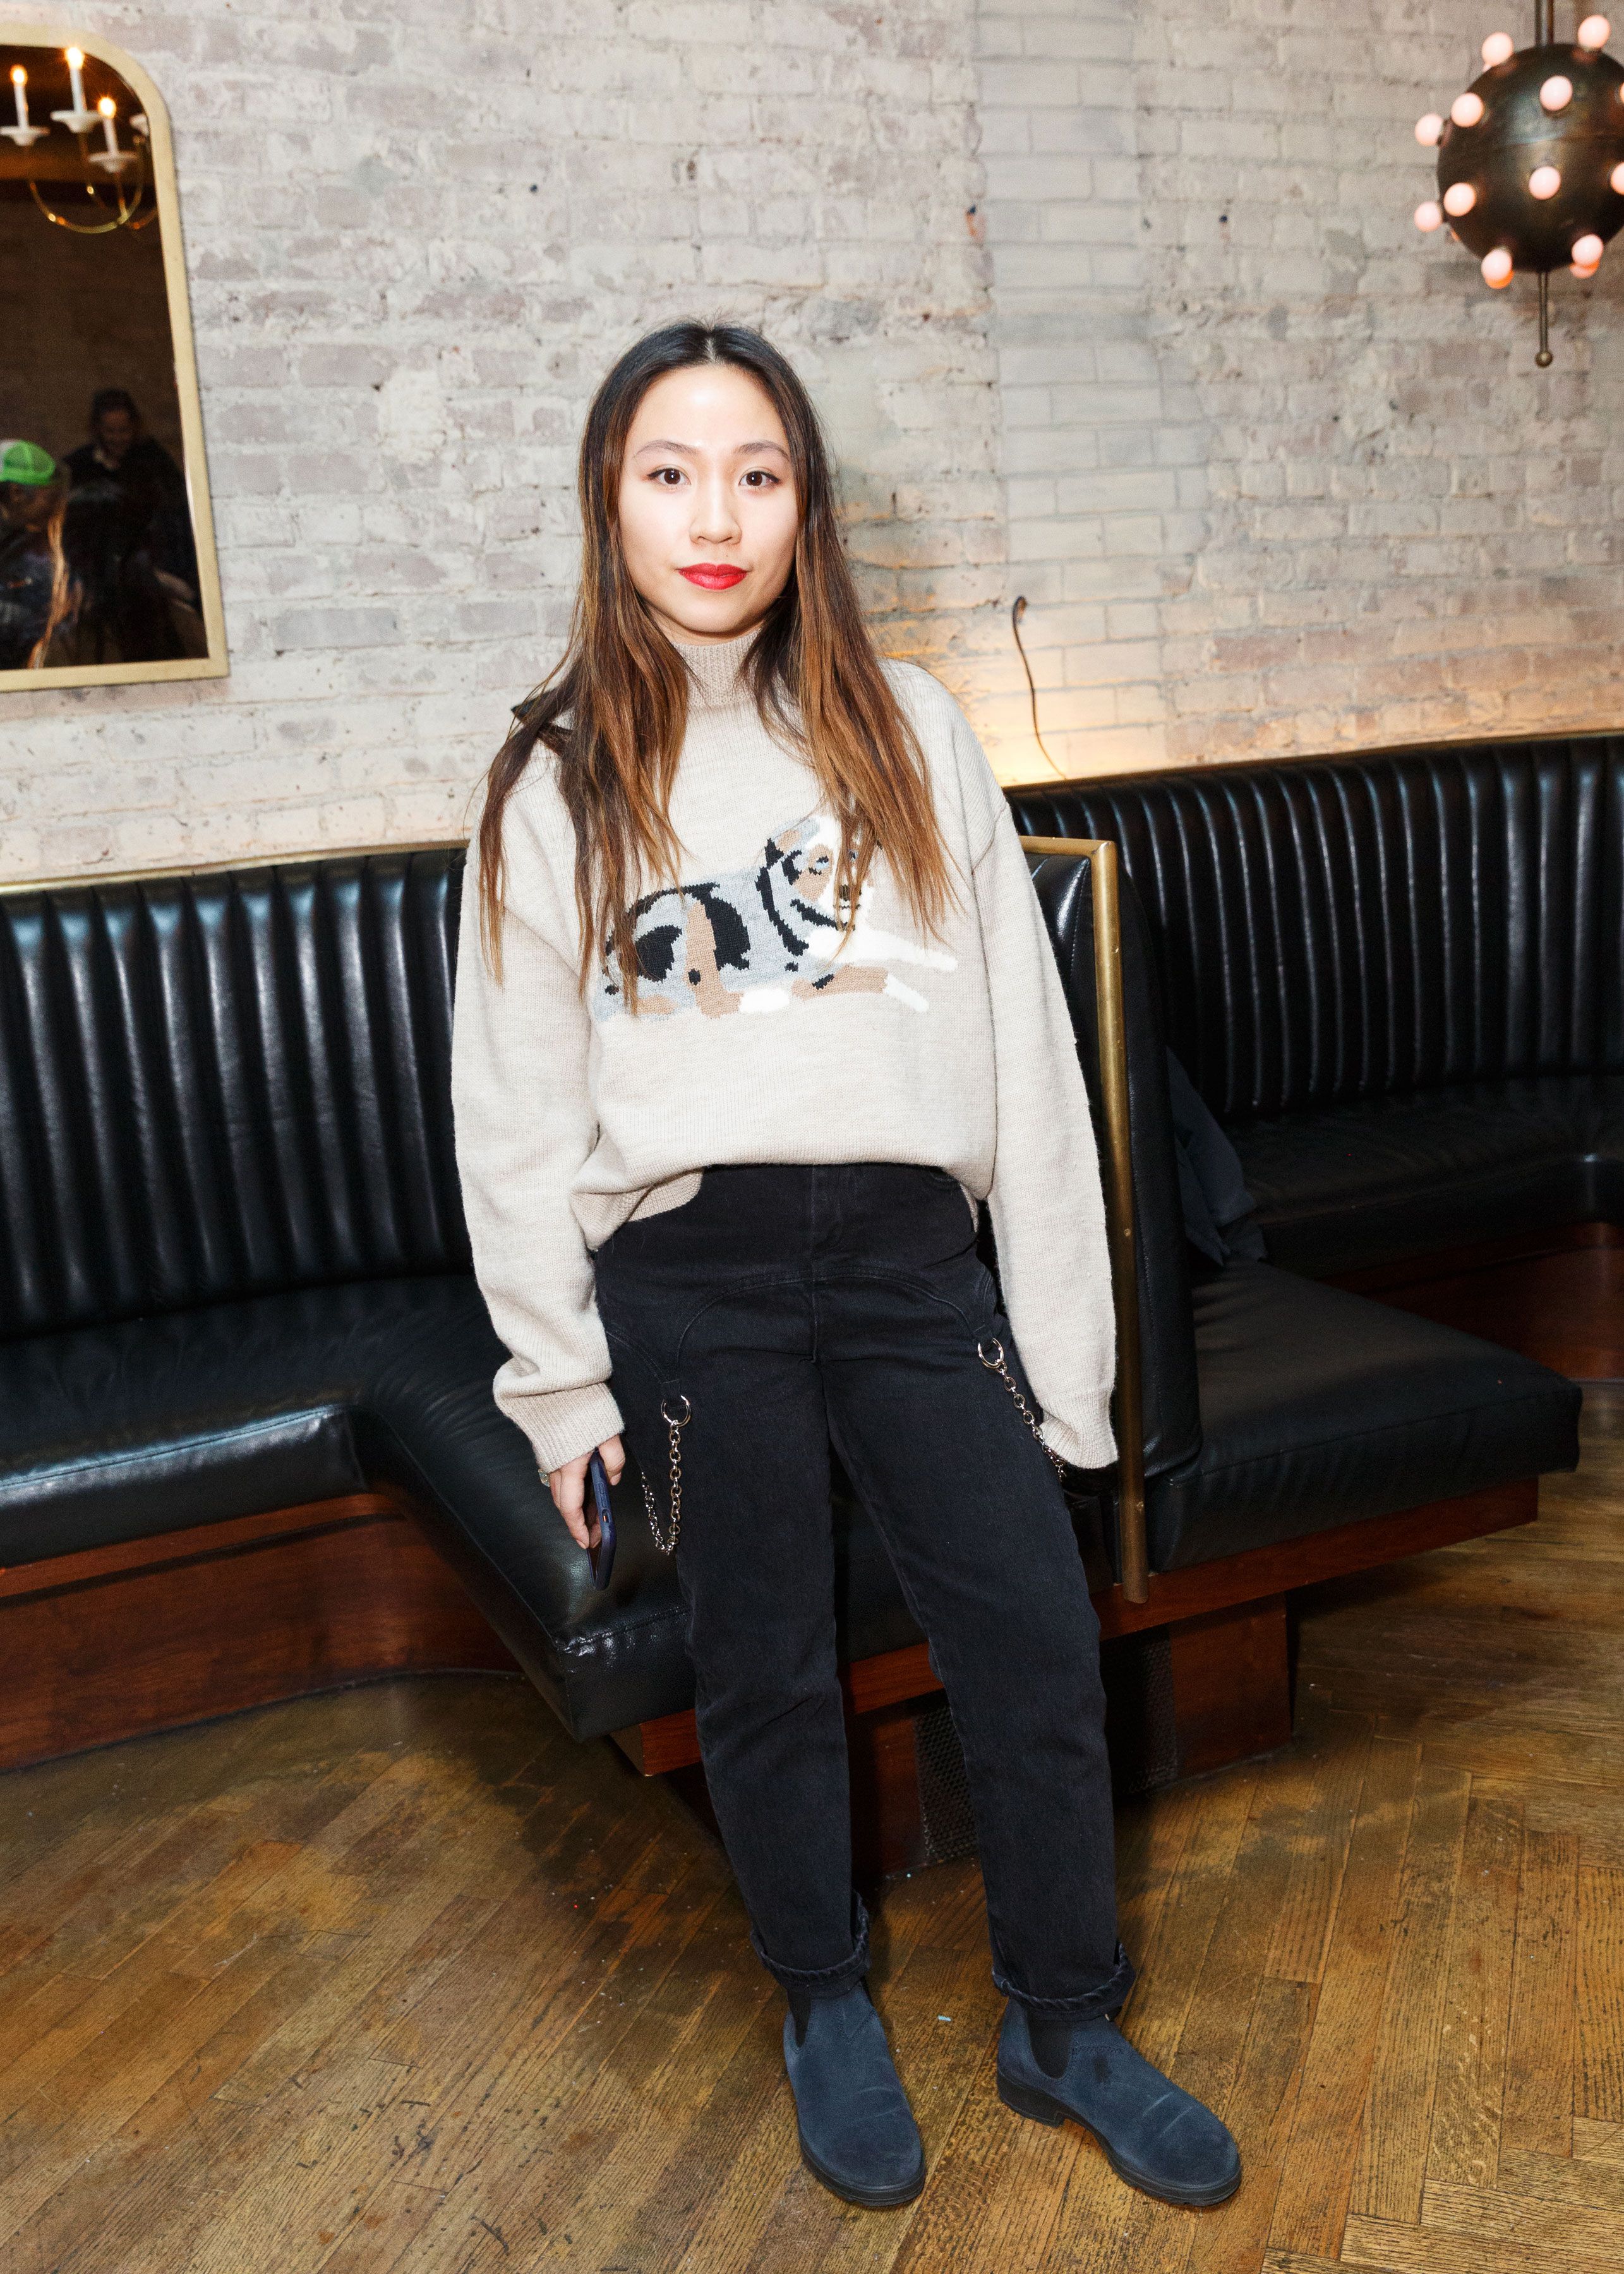 Designer Sandy Liang on Opening Her First Store in New York